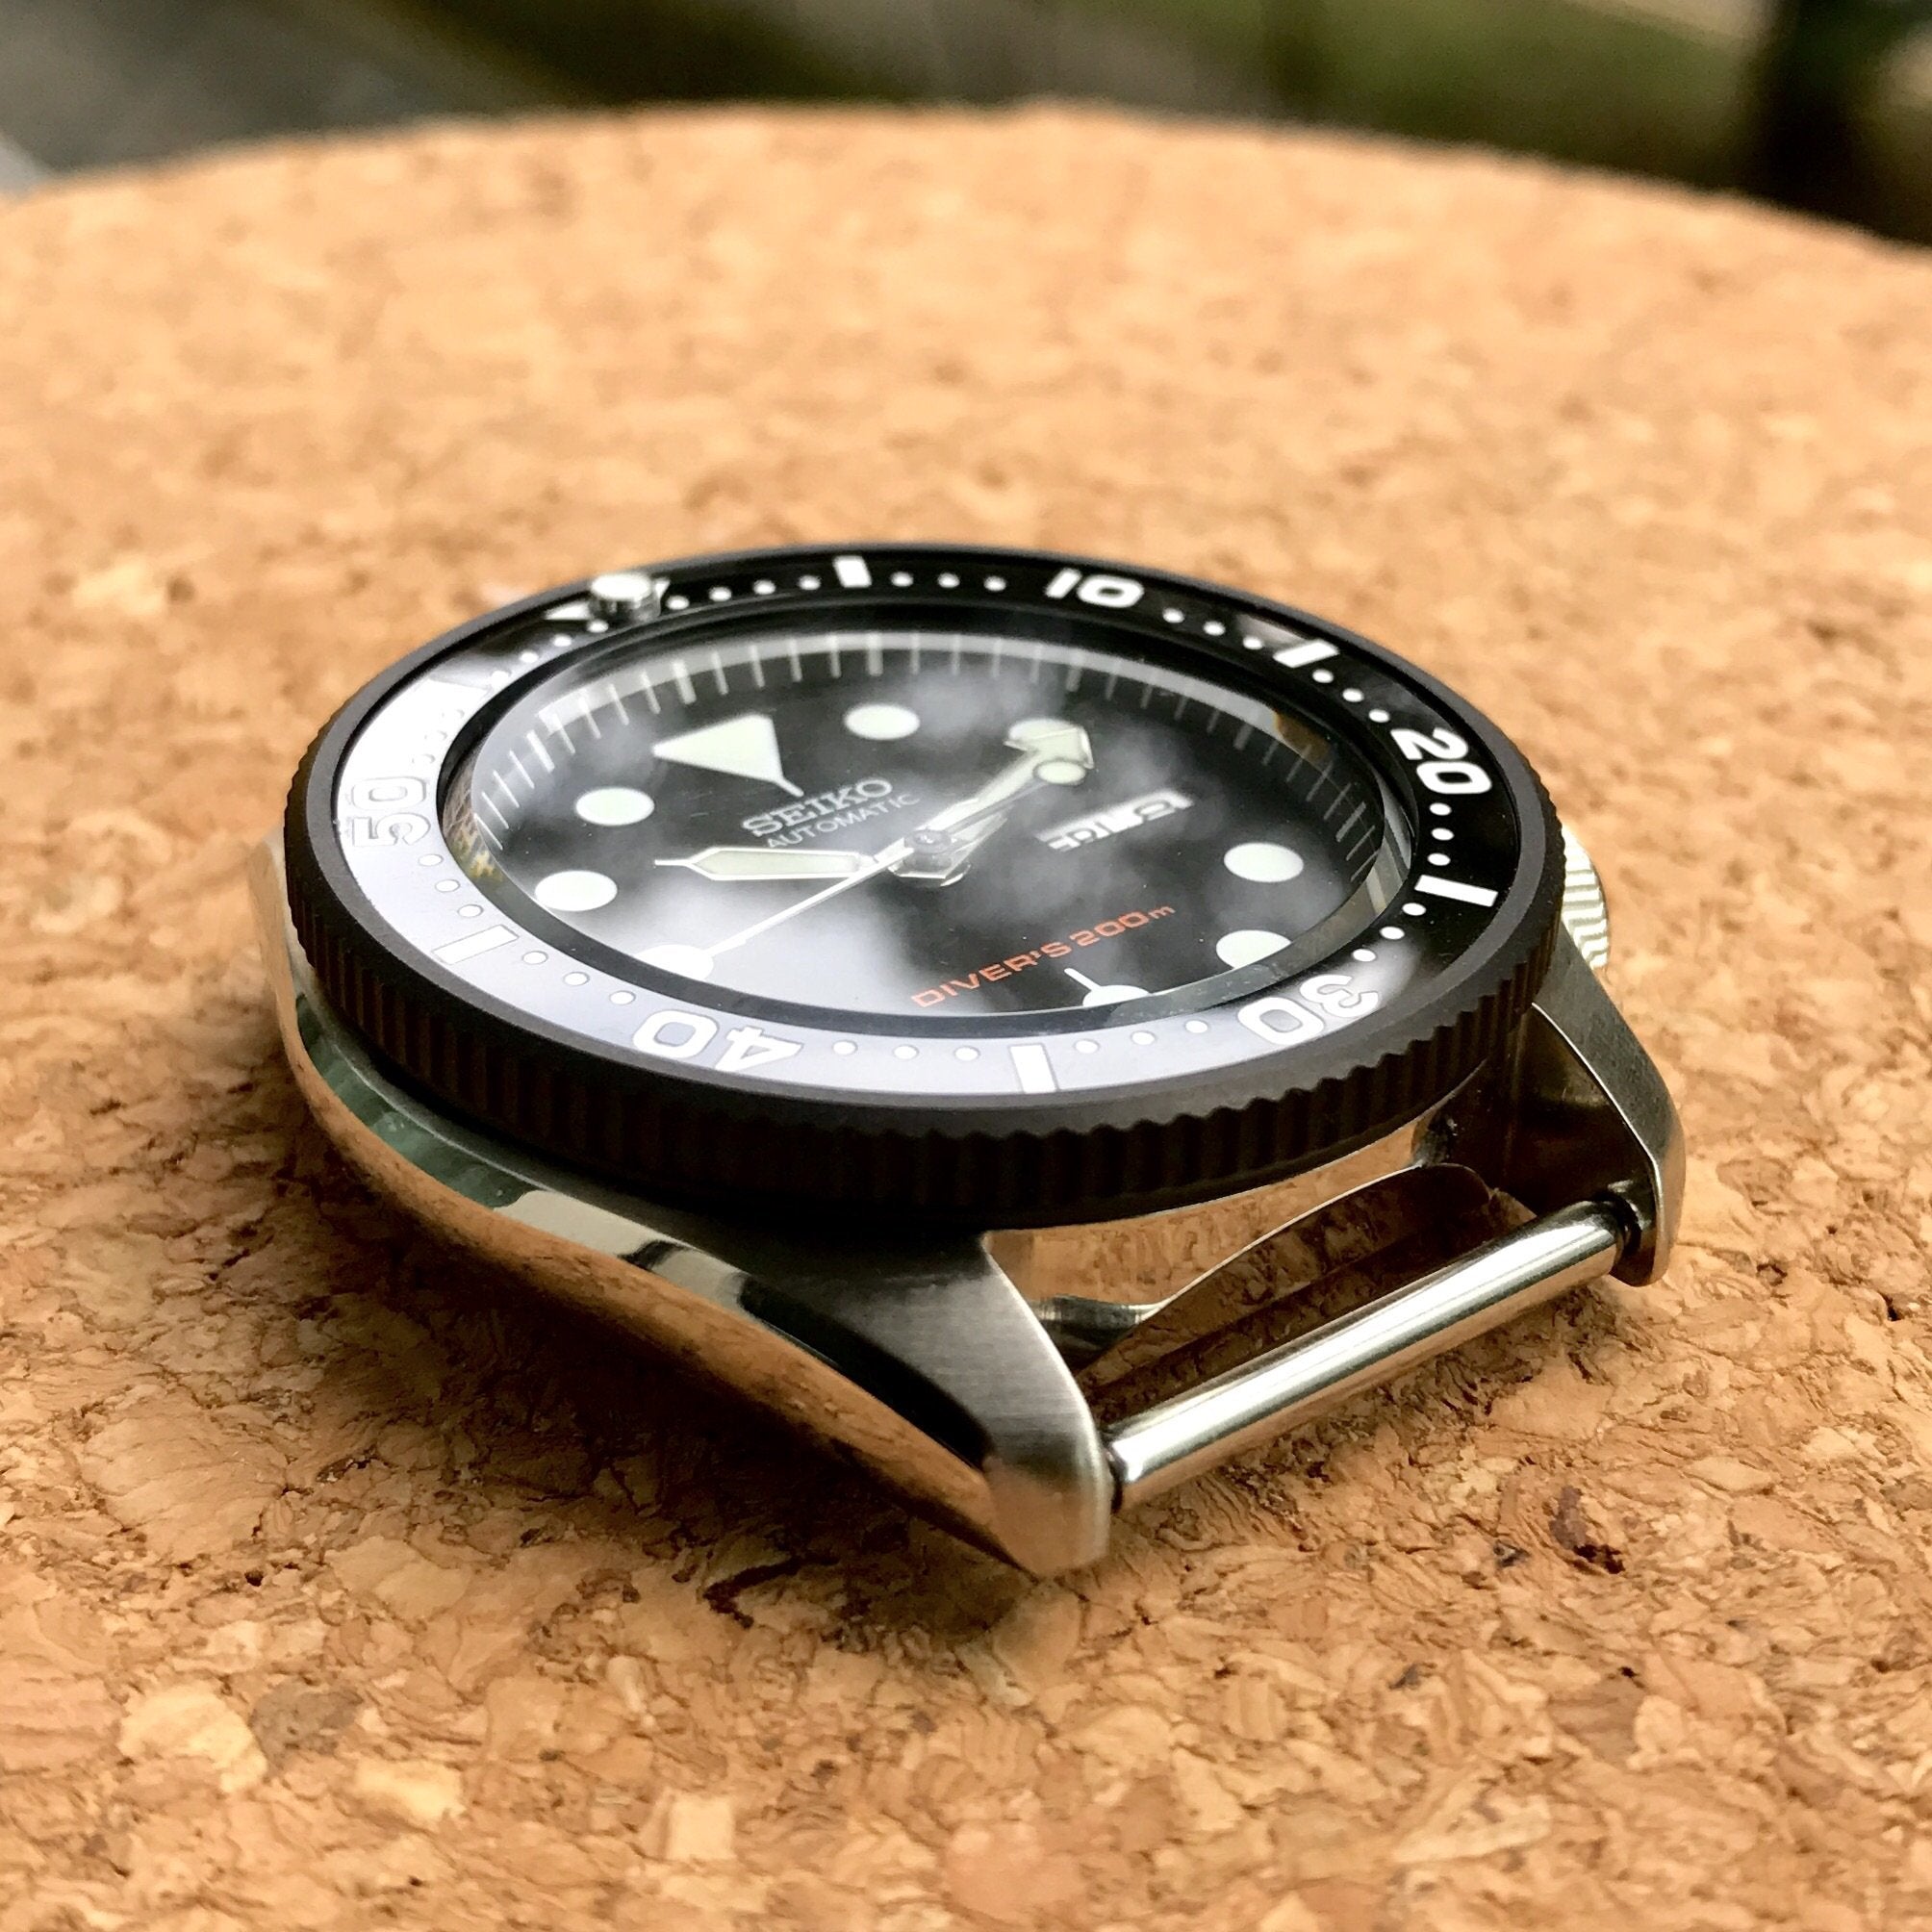 Bezel - SKX007/SRPD Coin Edge - Bead Blasted PVD Black - DLW WATCHES